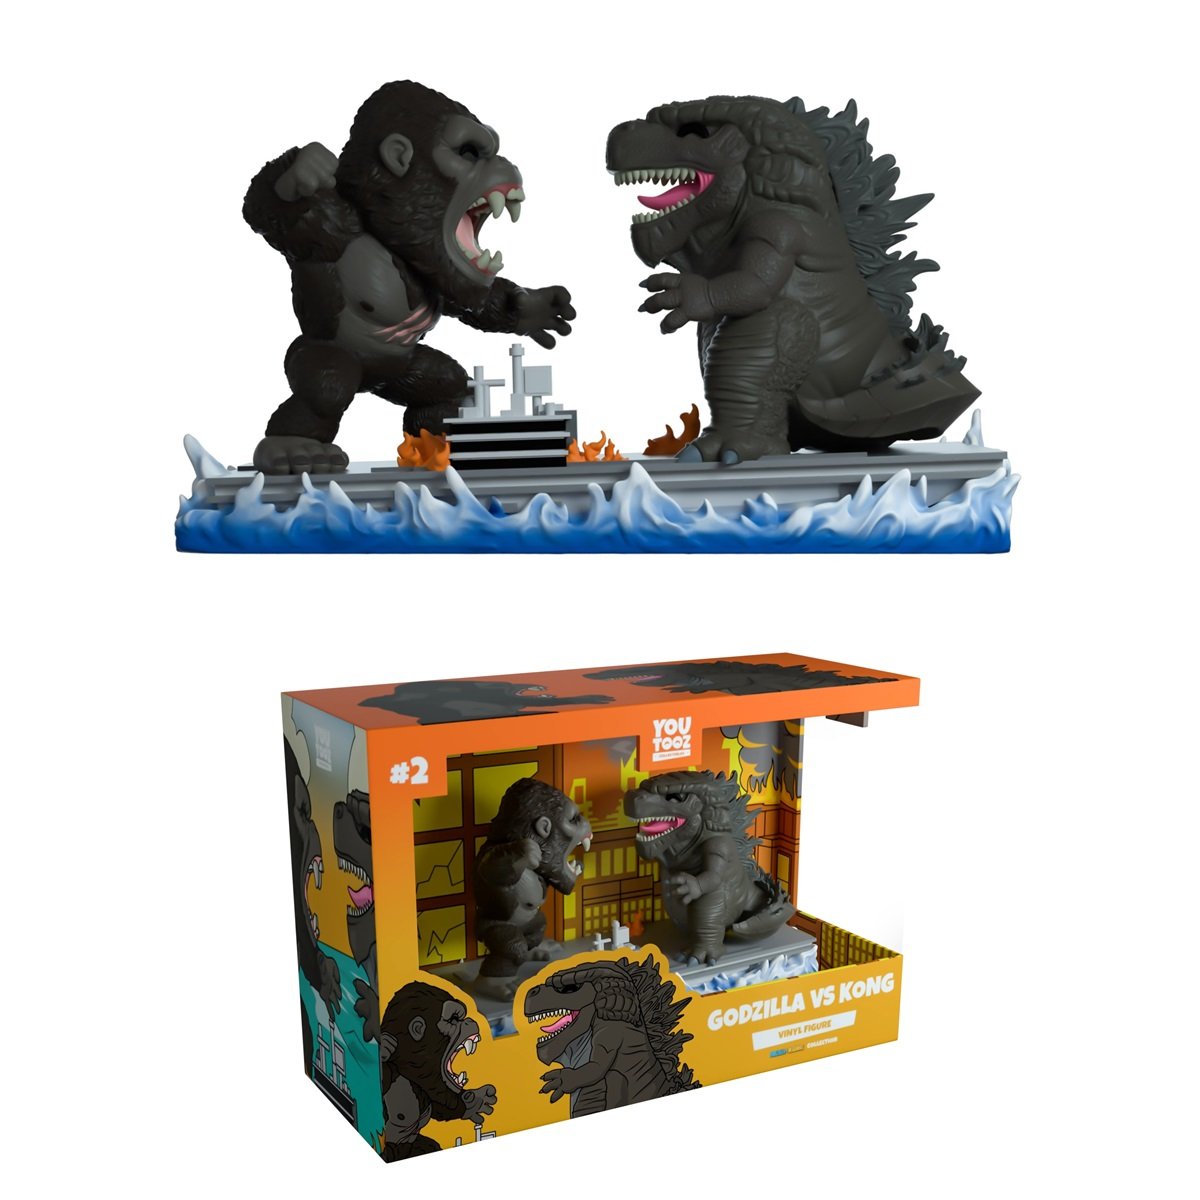 Godzilla vs Kong toy from Youtooz Collectibles.